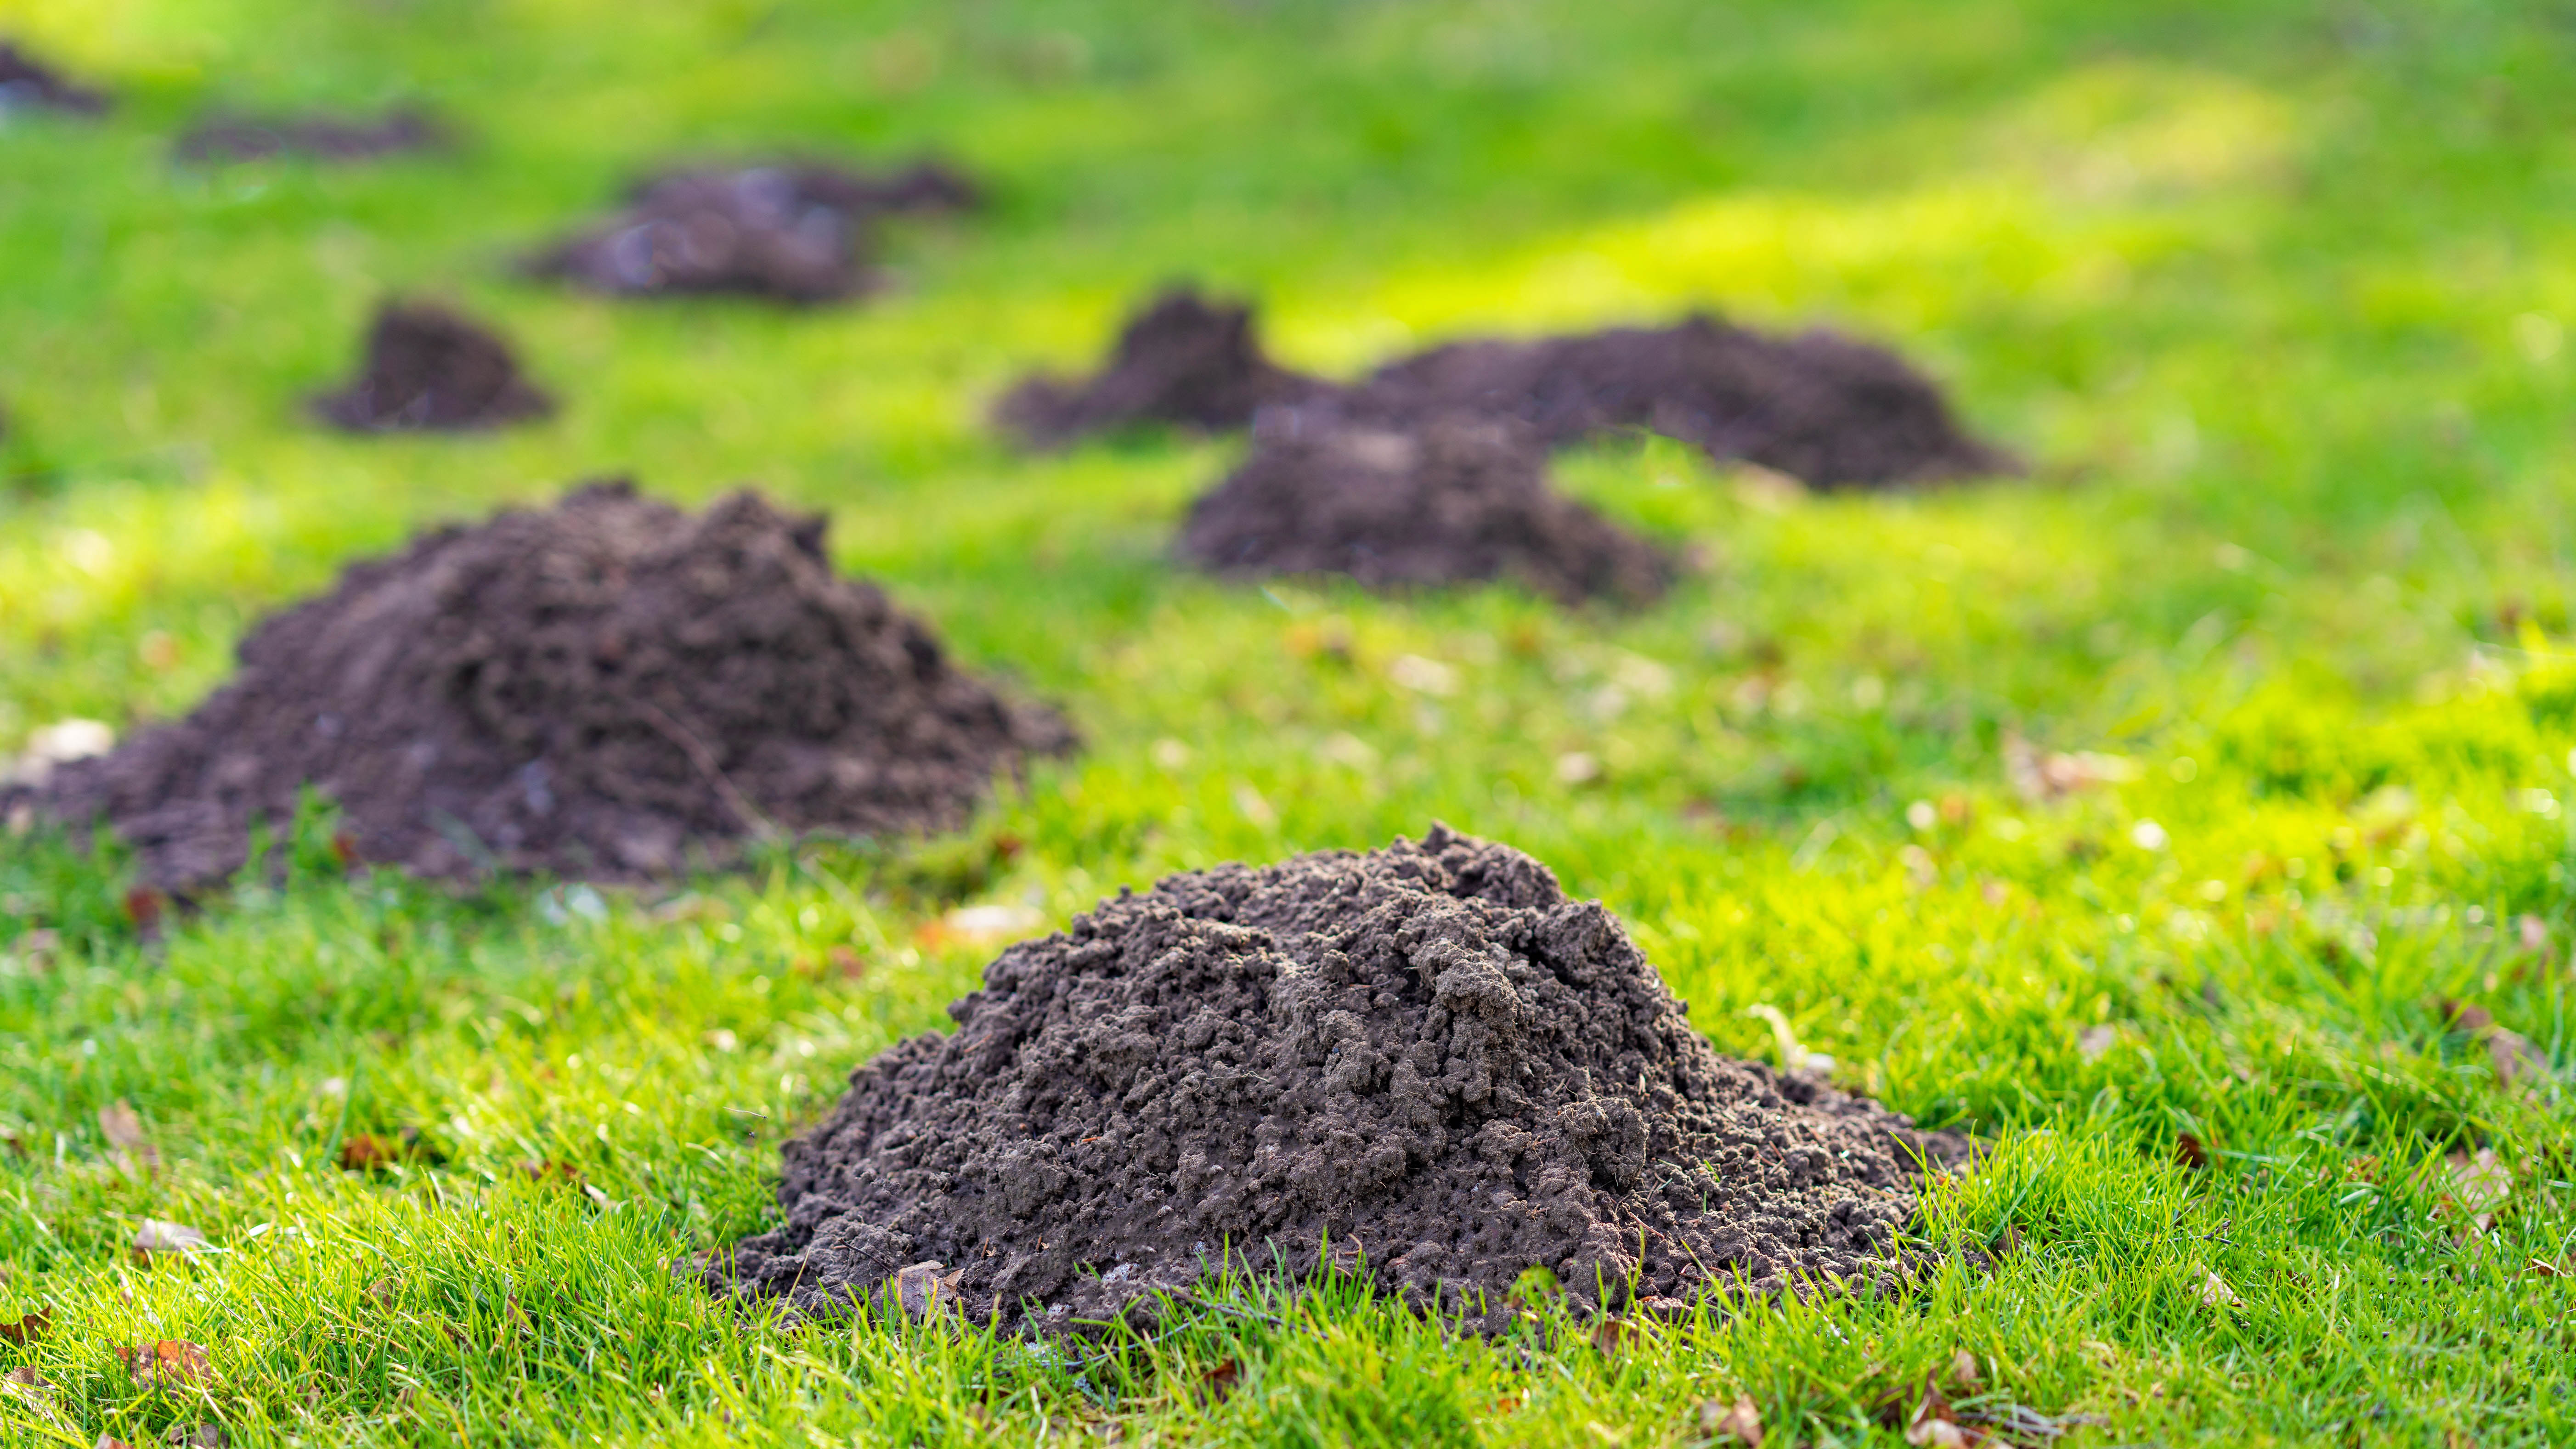 A collection of molehills in a yard